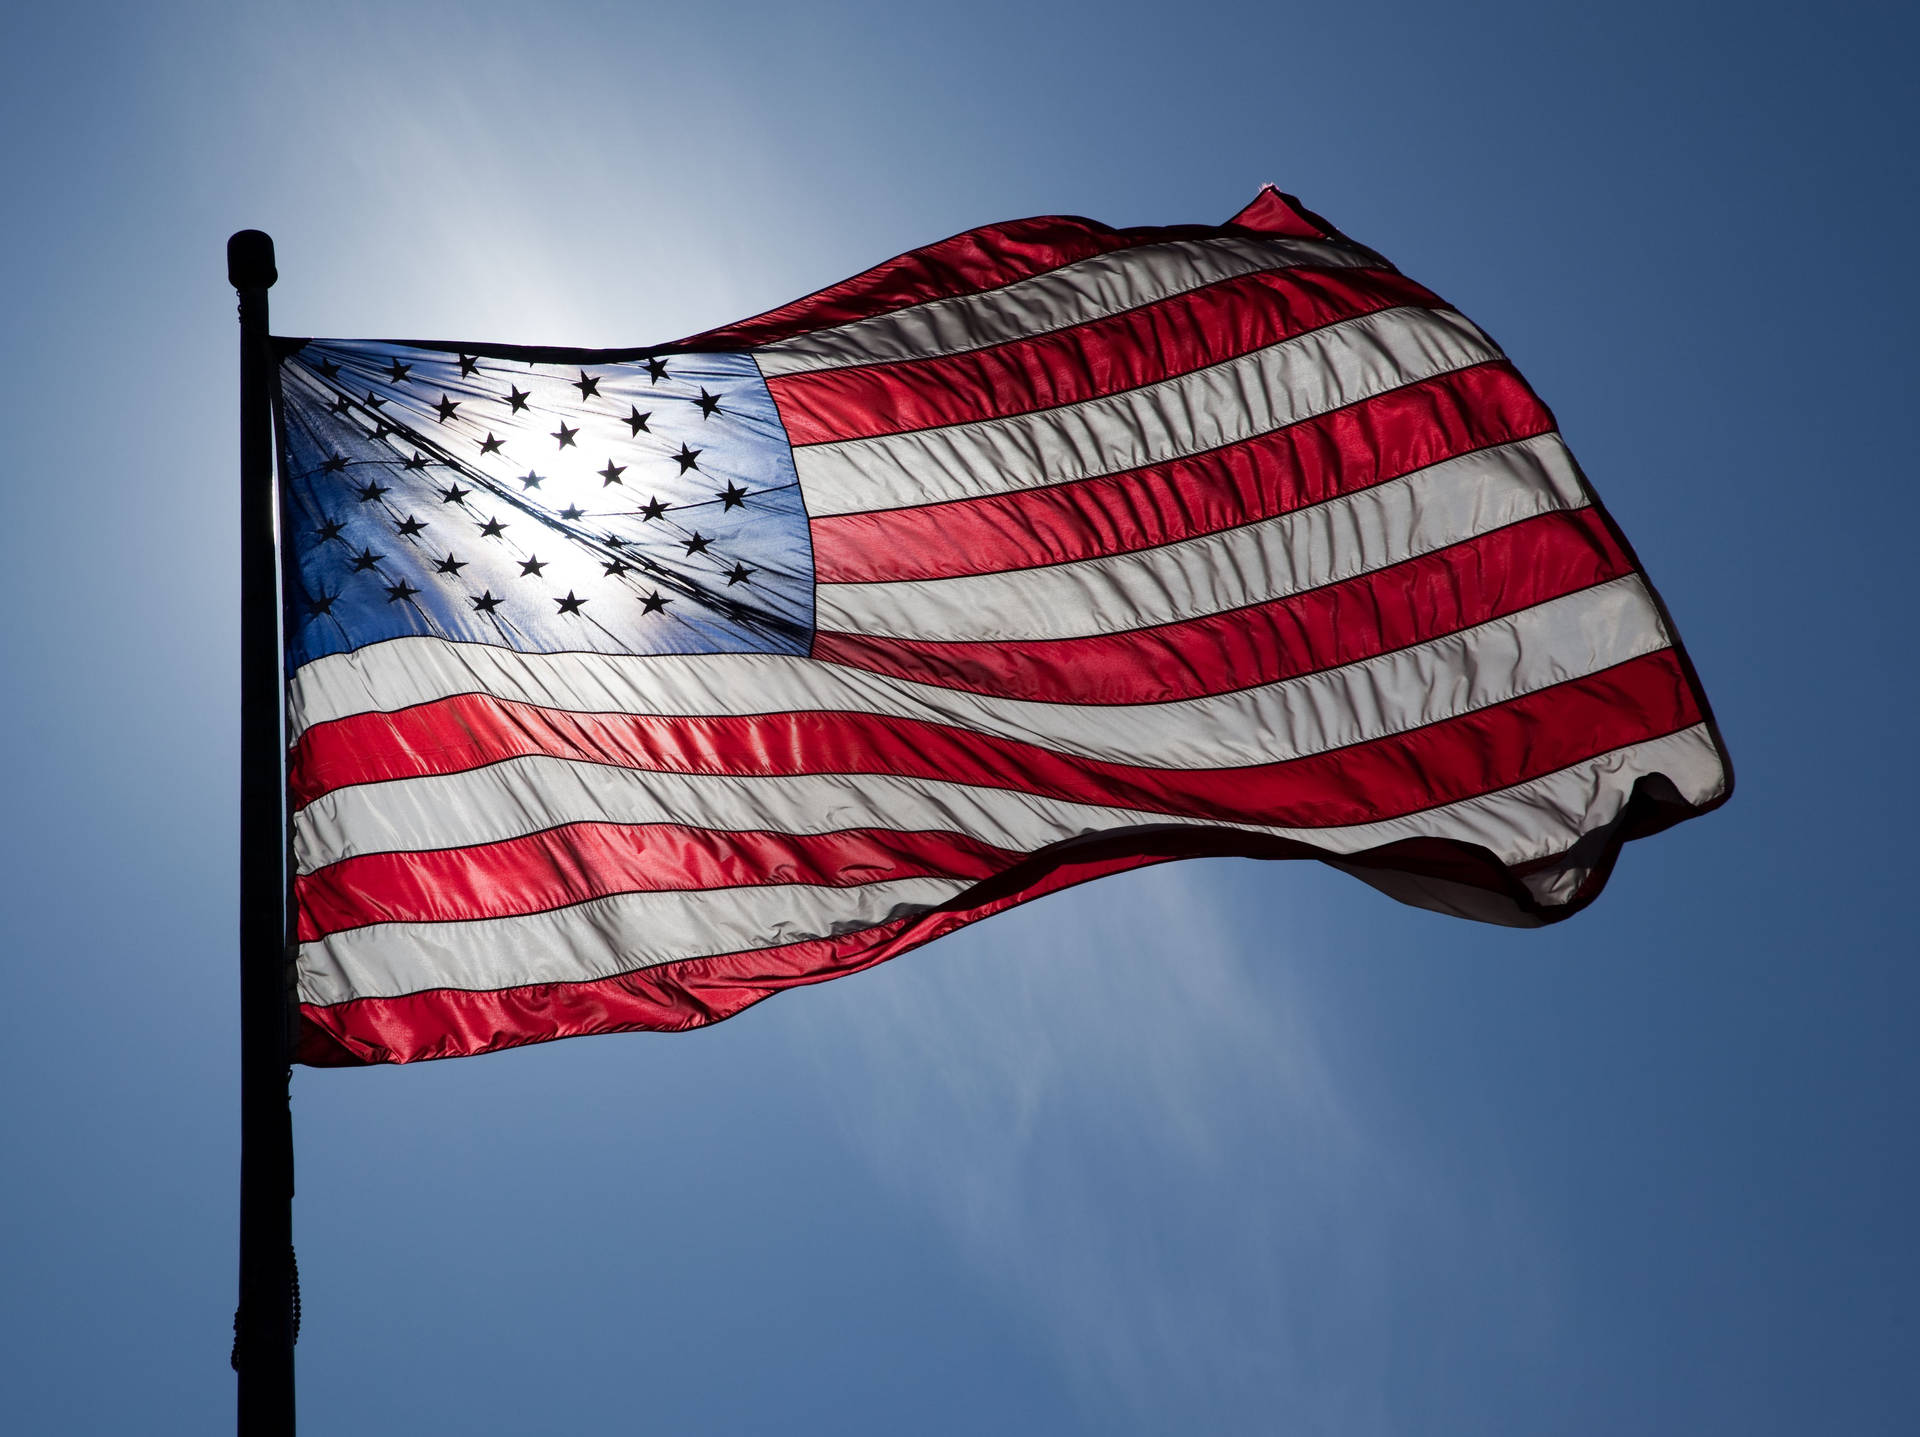 America 4491X3361 Wallpaper and Background Image